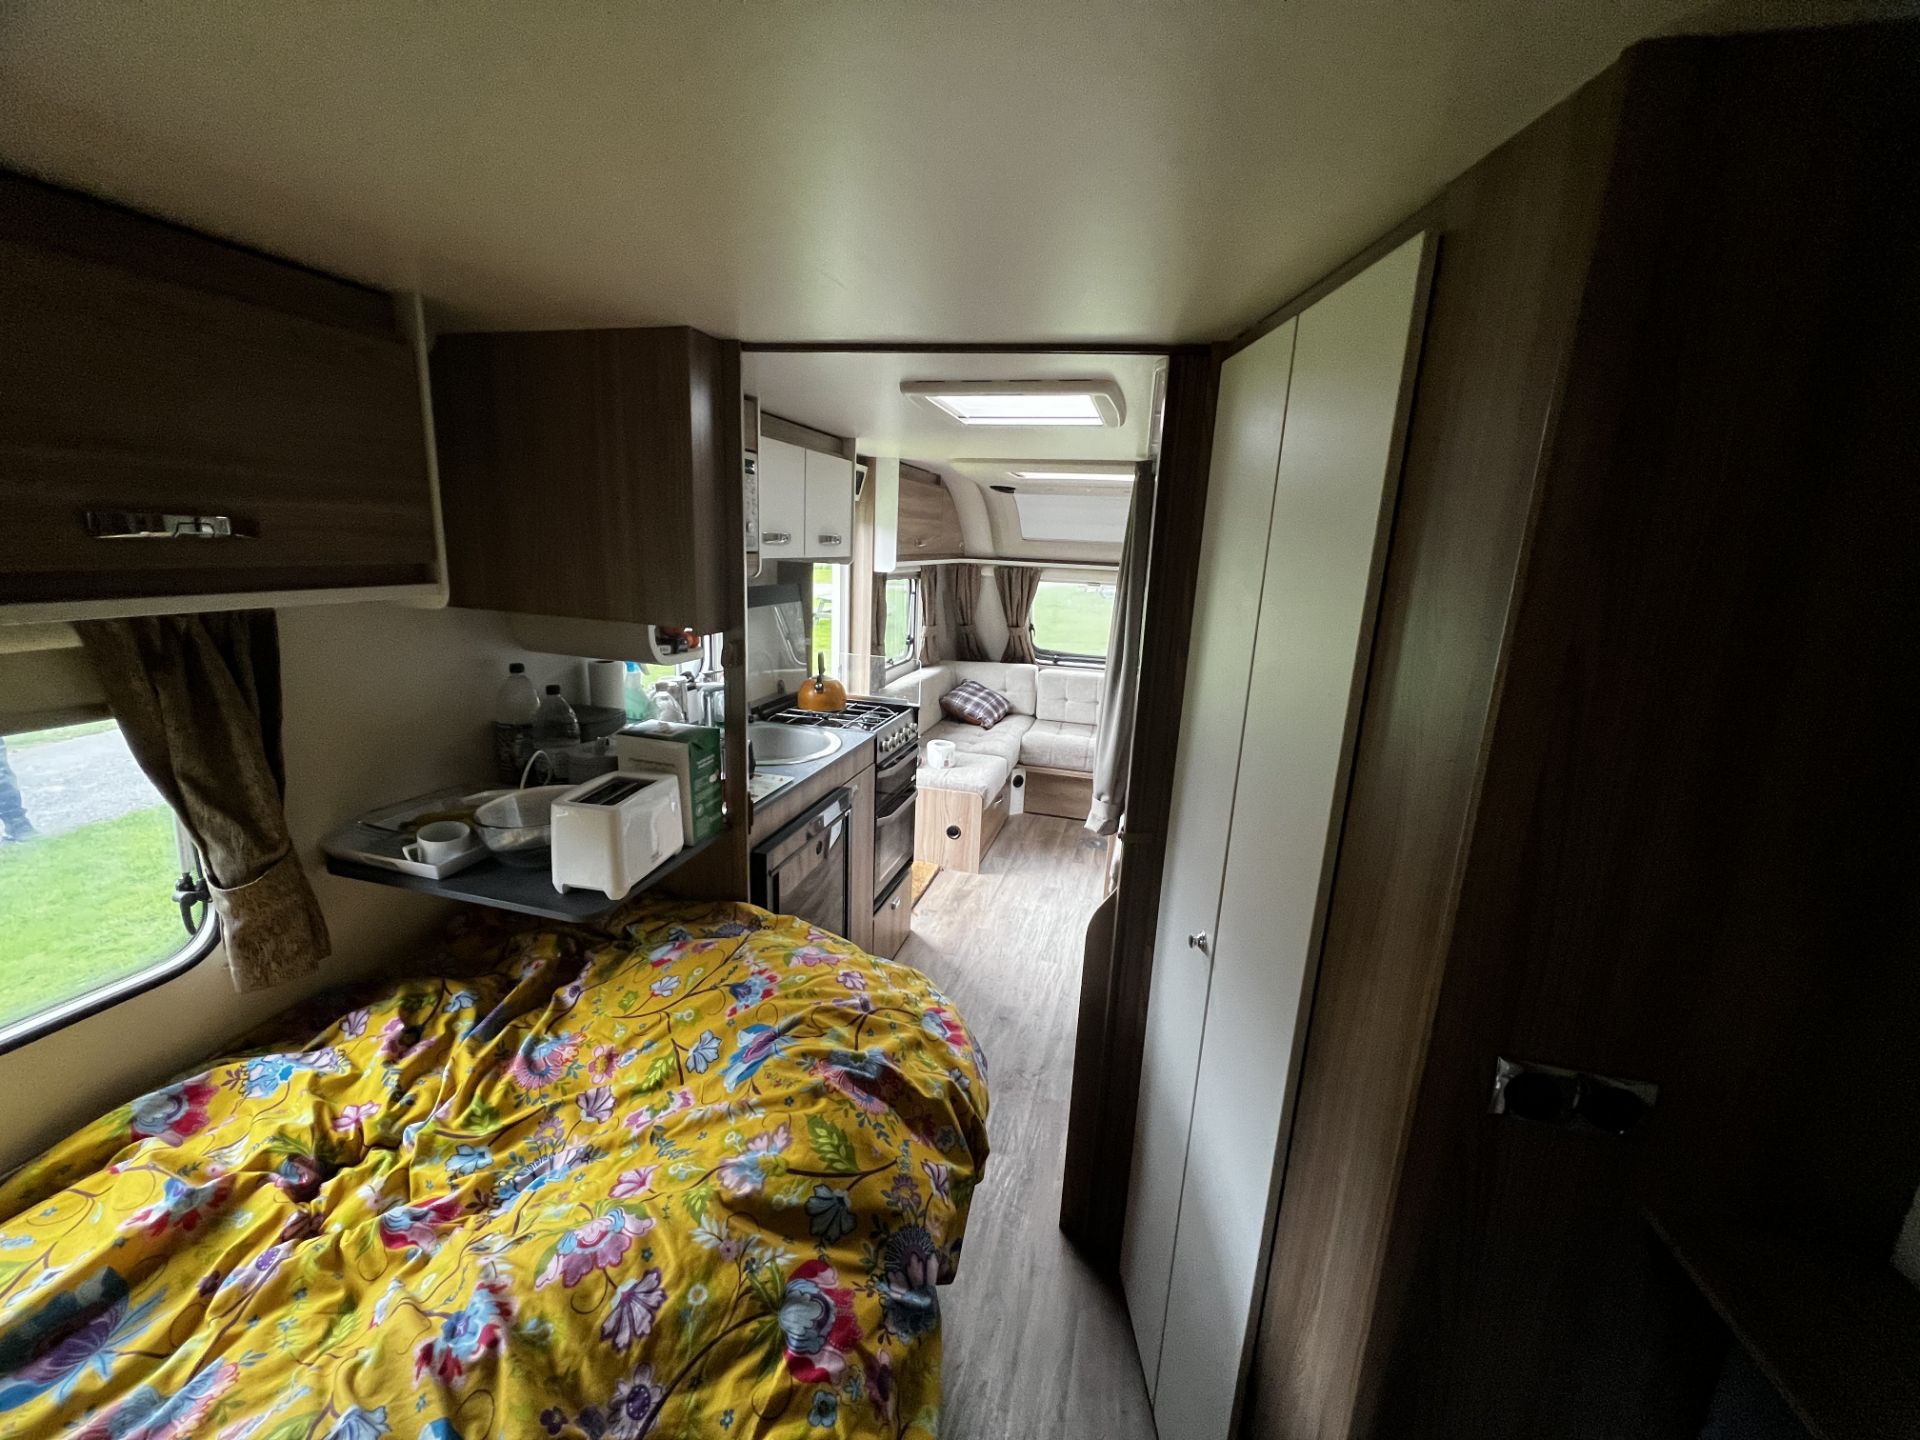 Sprite Caravan Swift Quatro EW, purchased new March 2022 double axle wheel base, cooker, 3 ring hob, - Image 18 of 23